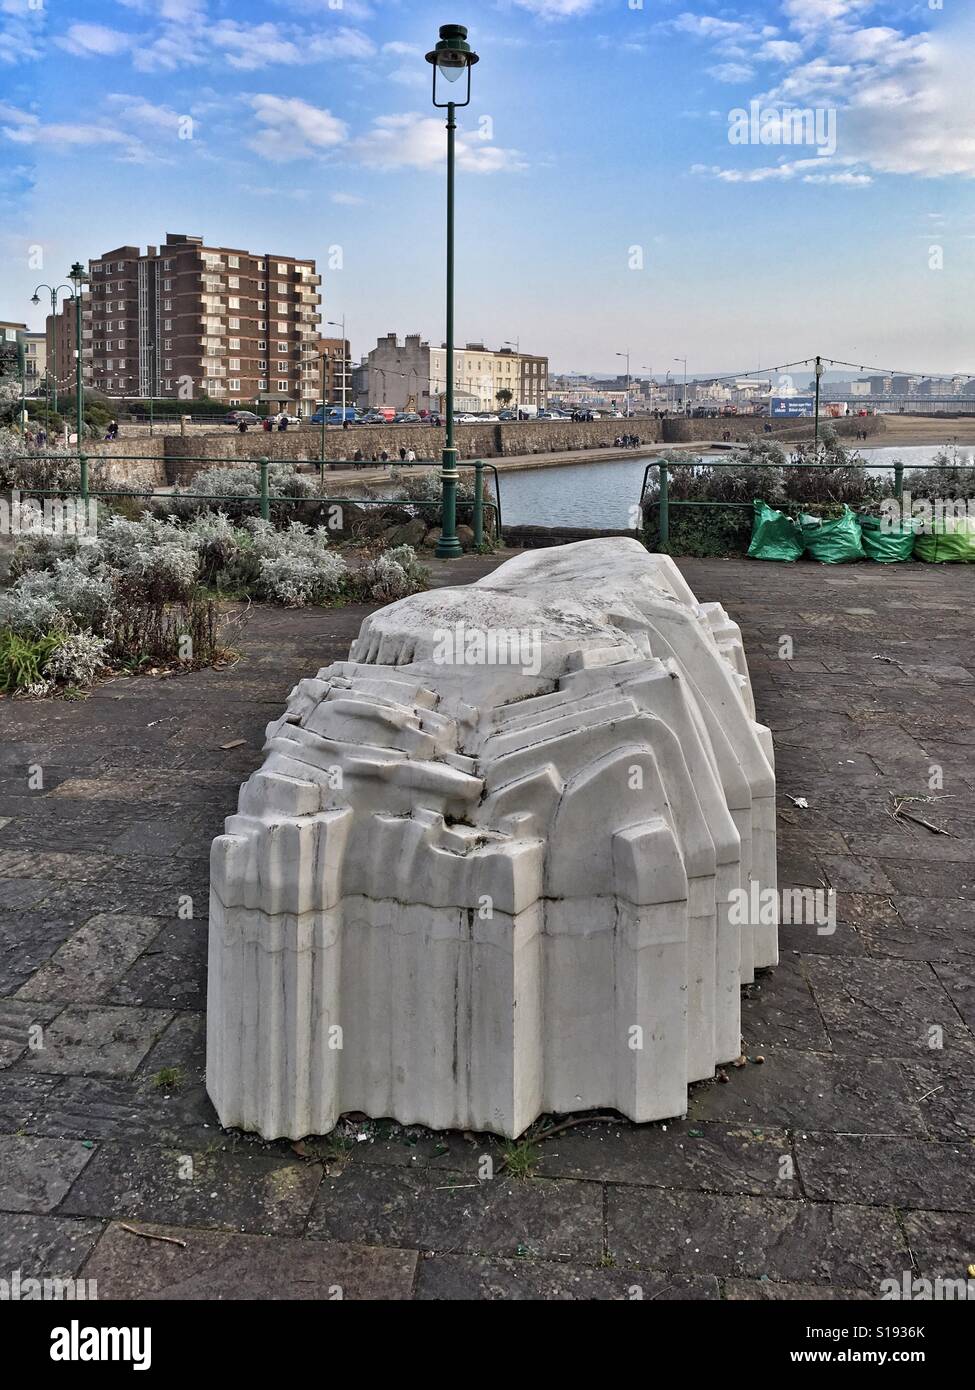 'HOLM' by Tania Kovats, one of the Wonders of Weston, a series of public artworks installed in Weston-super-Mare, UK, in 2010 Stock Photo